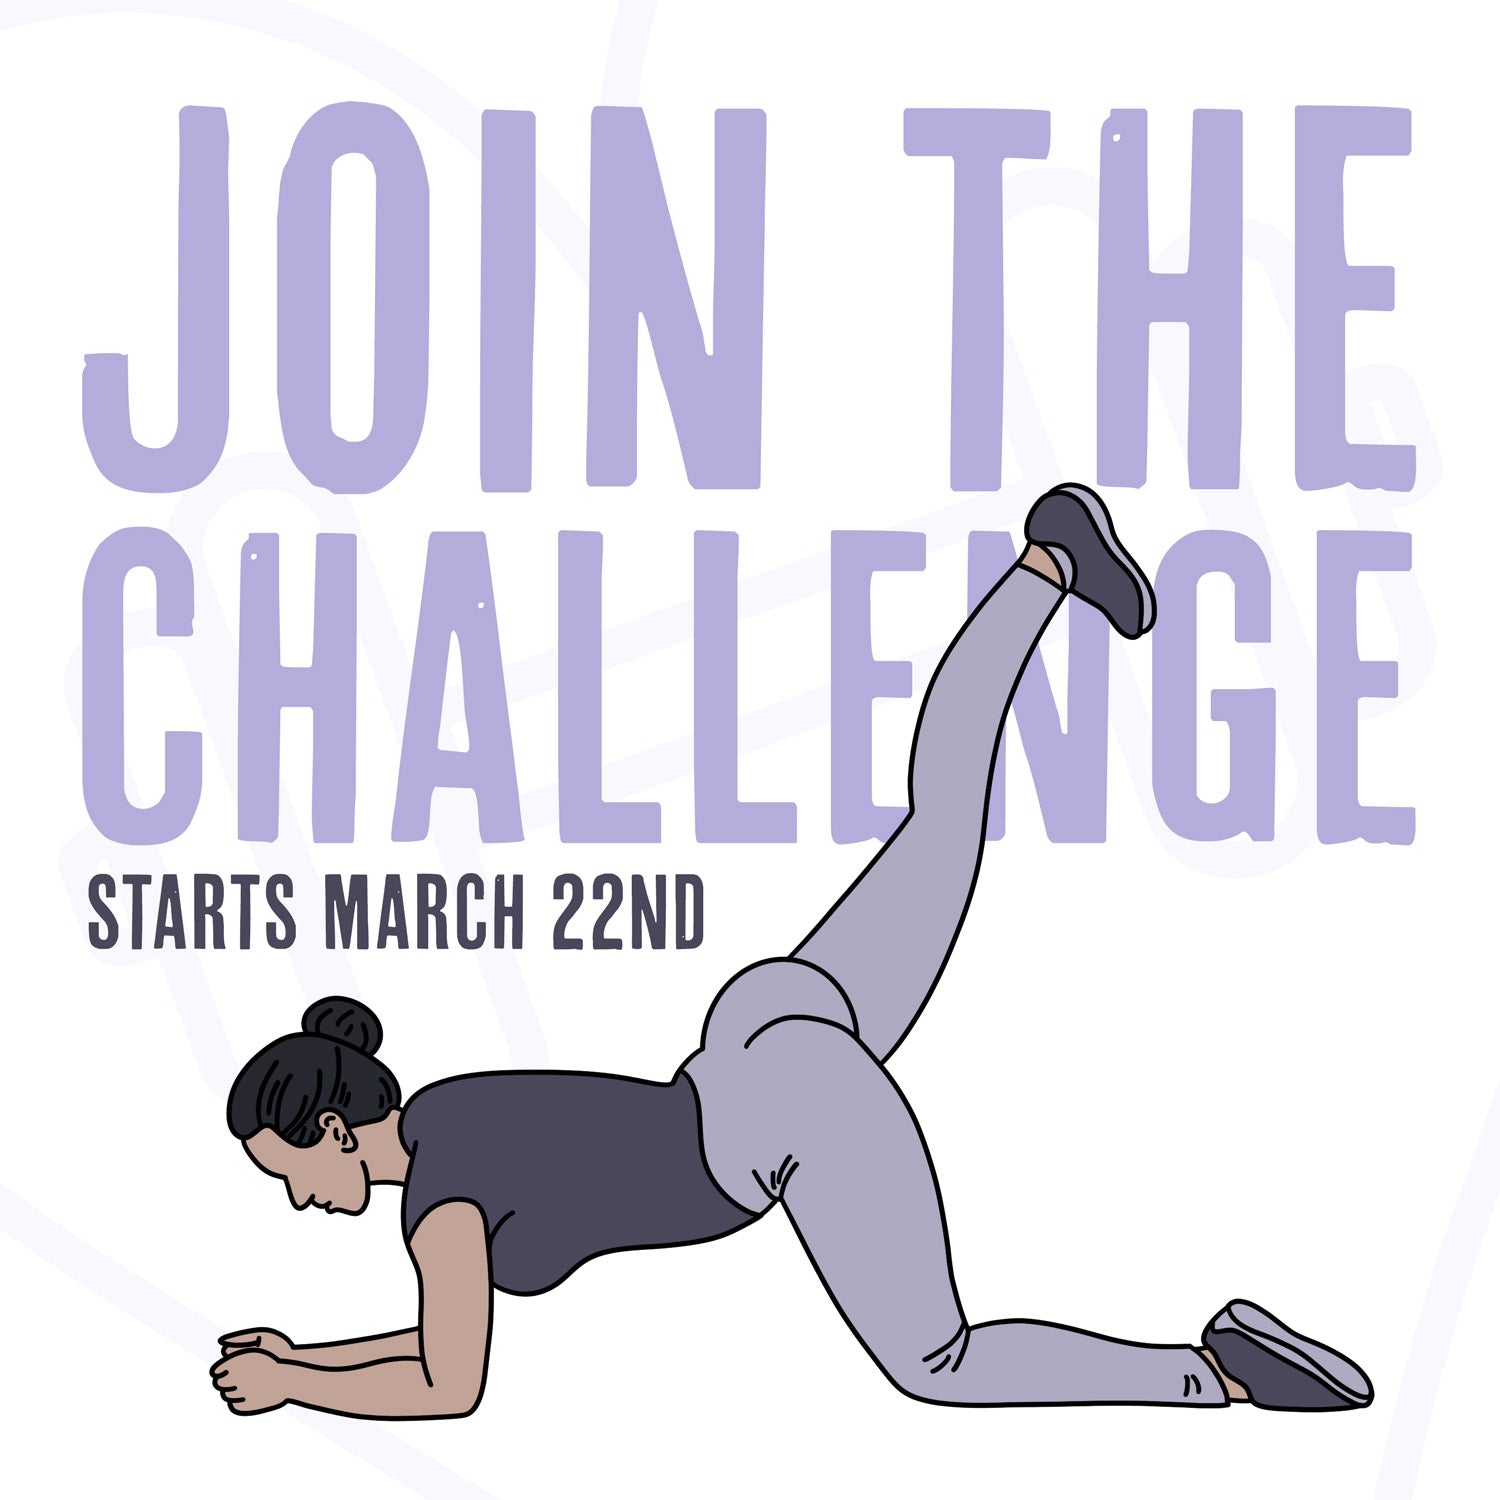 March 22nd Challenge